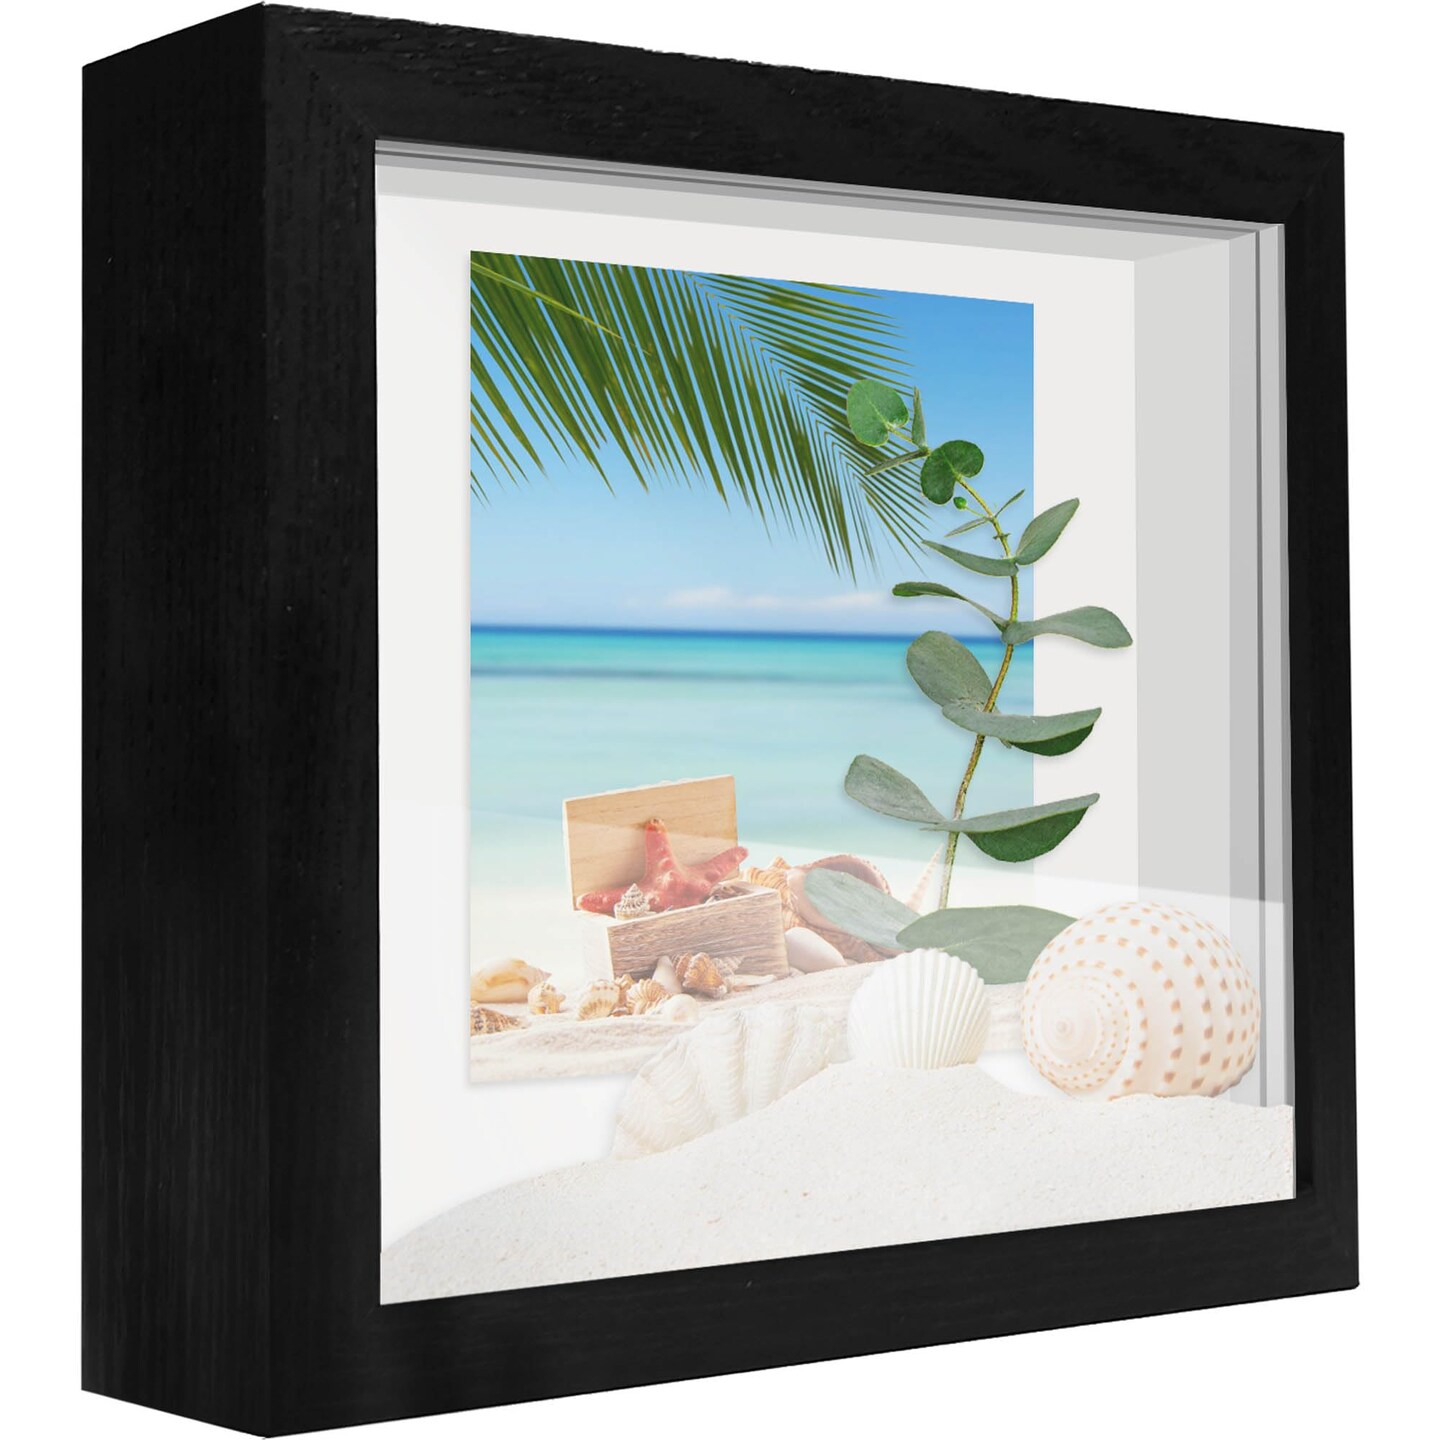 SUNMEG Small Shadow Box Frame 5x5, Wood with Plexiglass, Display Case Box for Memorabilia, Medal, Crafts,Tickets and Photos, Picture Frame for Wall and Tabletop (Black, 5x5)